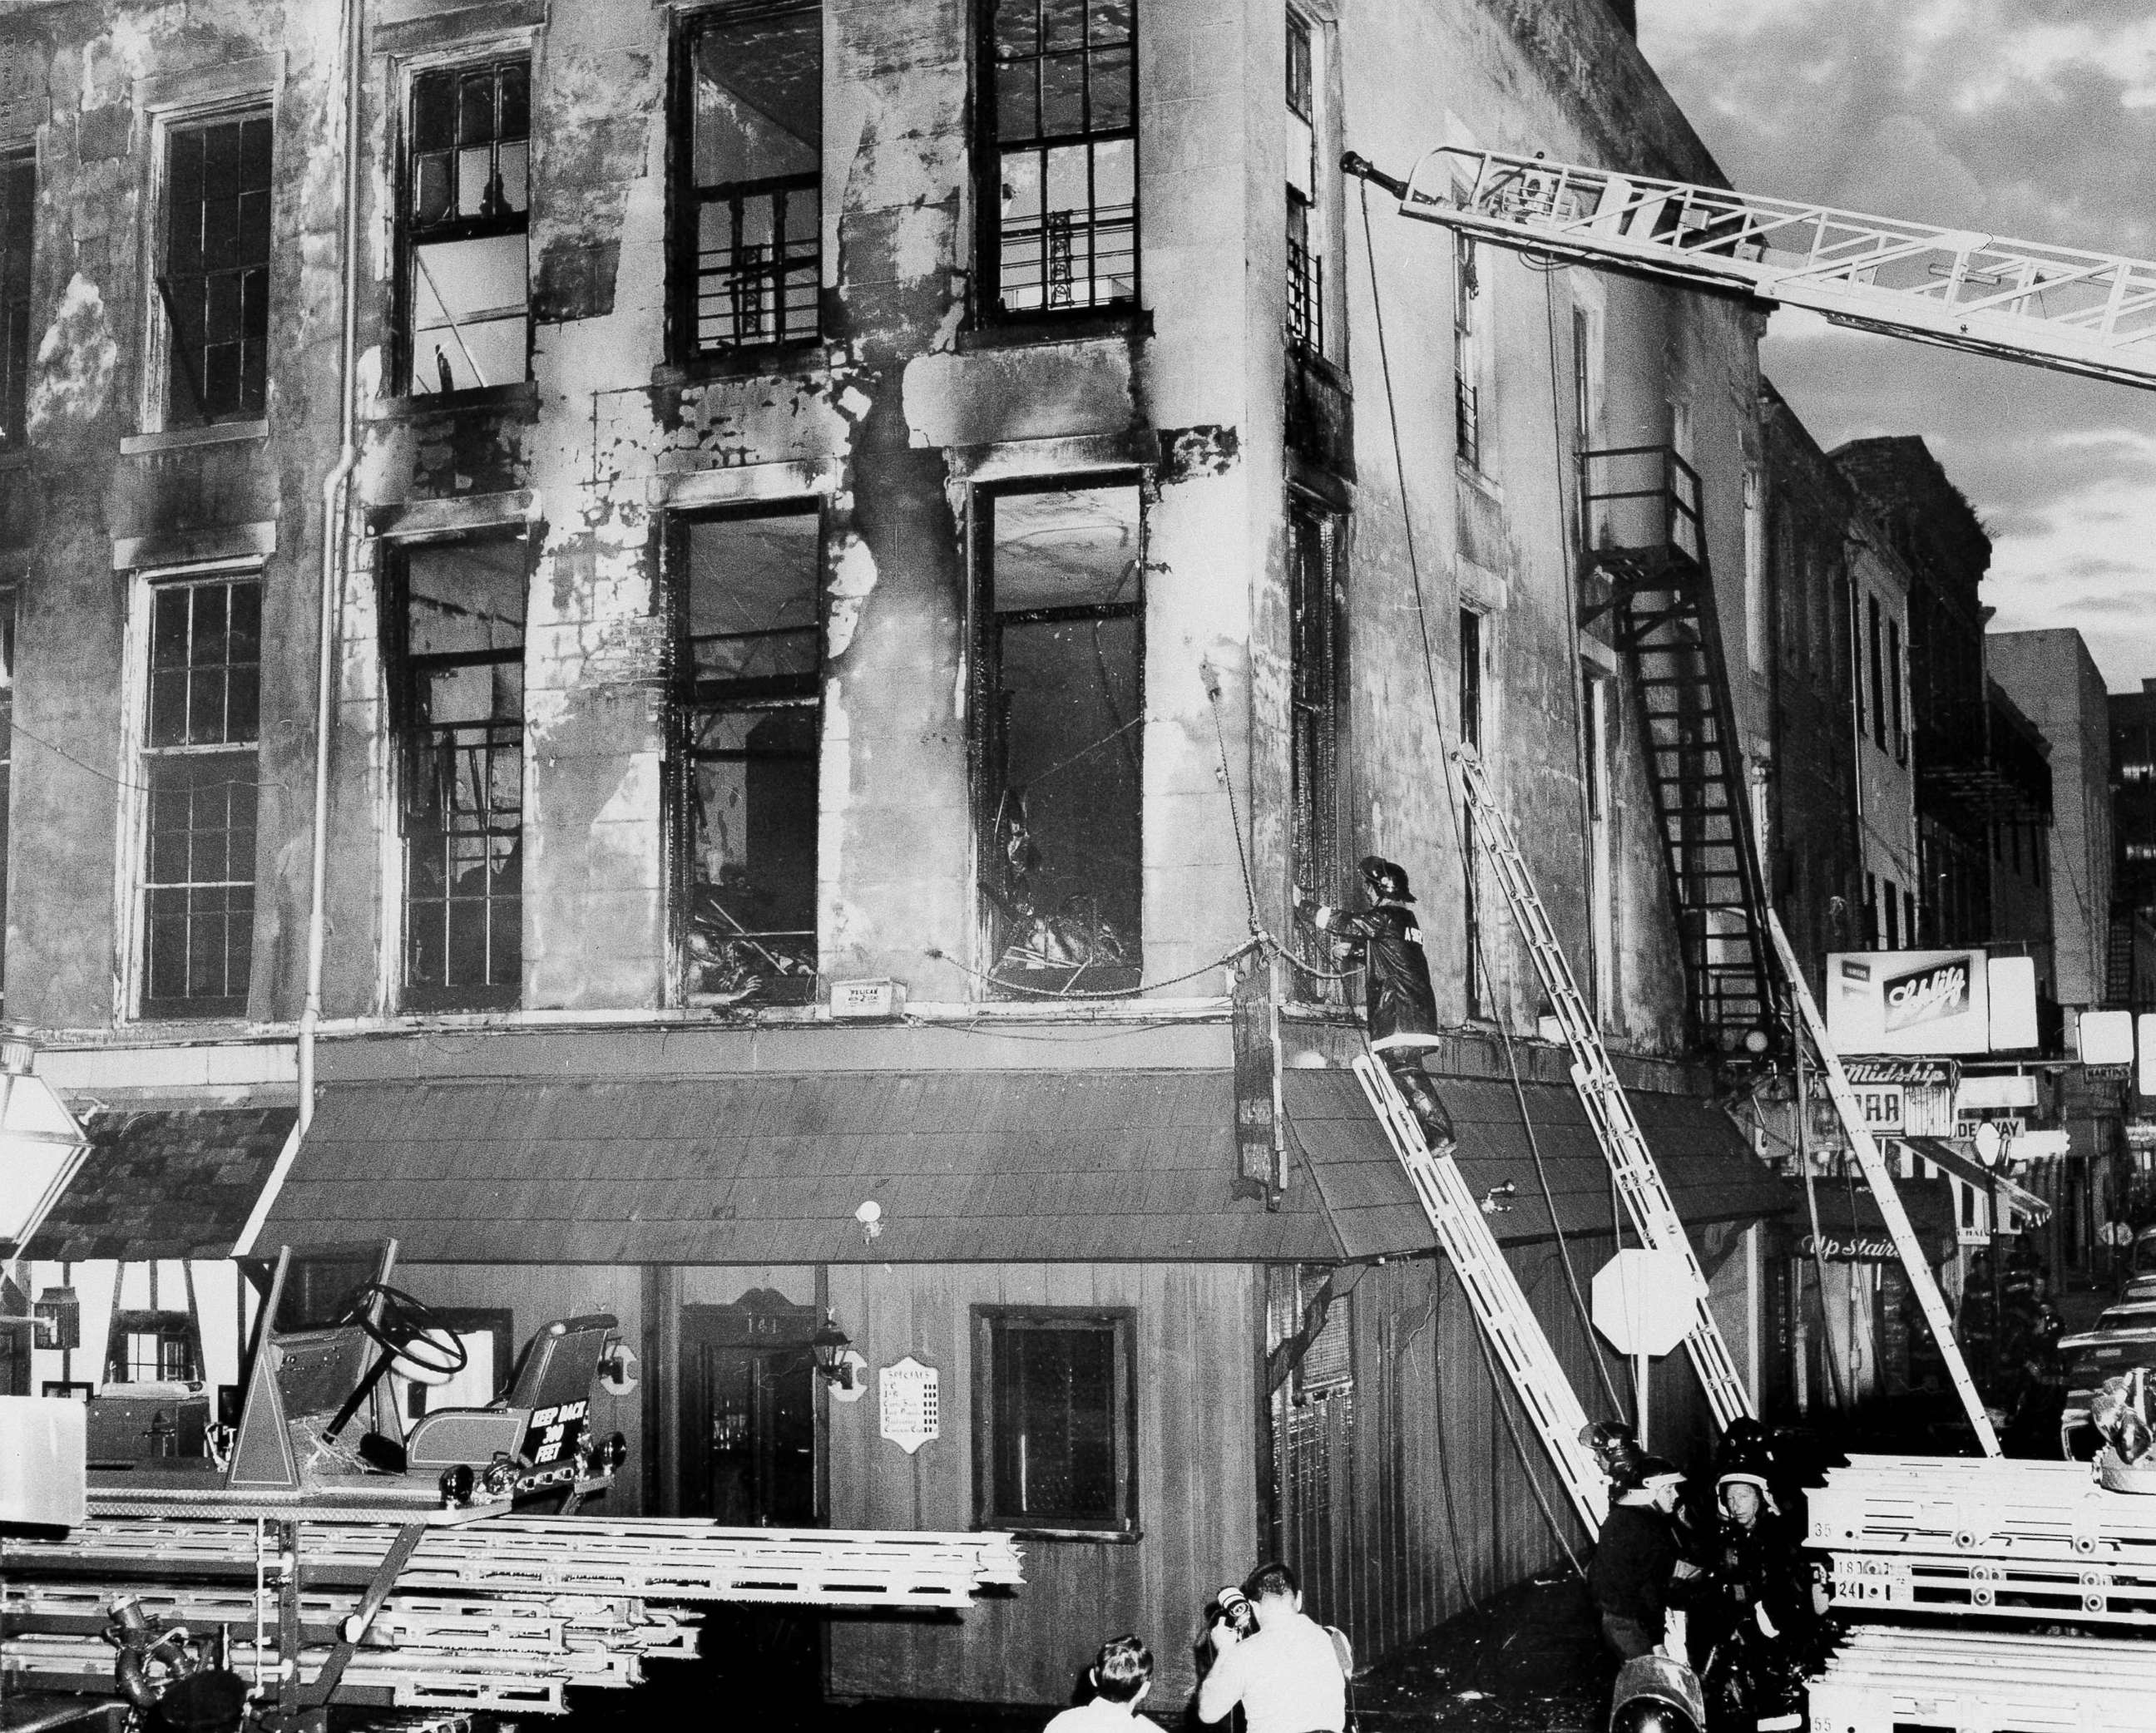 PHOTO: At least 28 persons were reported dead after a fire raced through a French Quarters barroom in a three-story building, June 25, 1973.